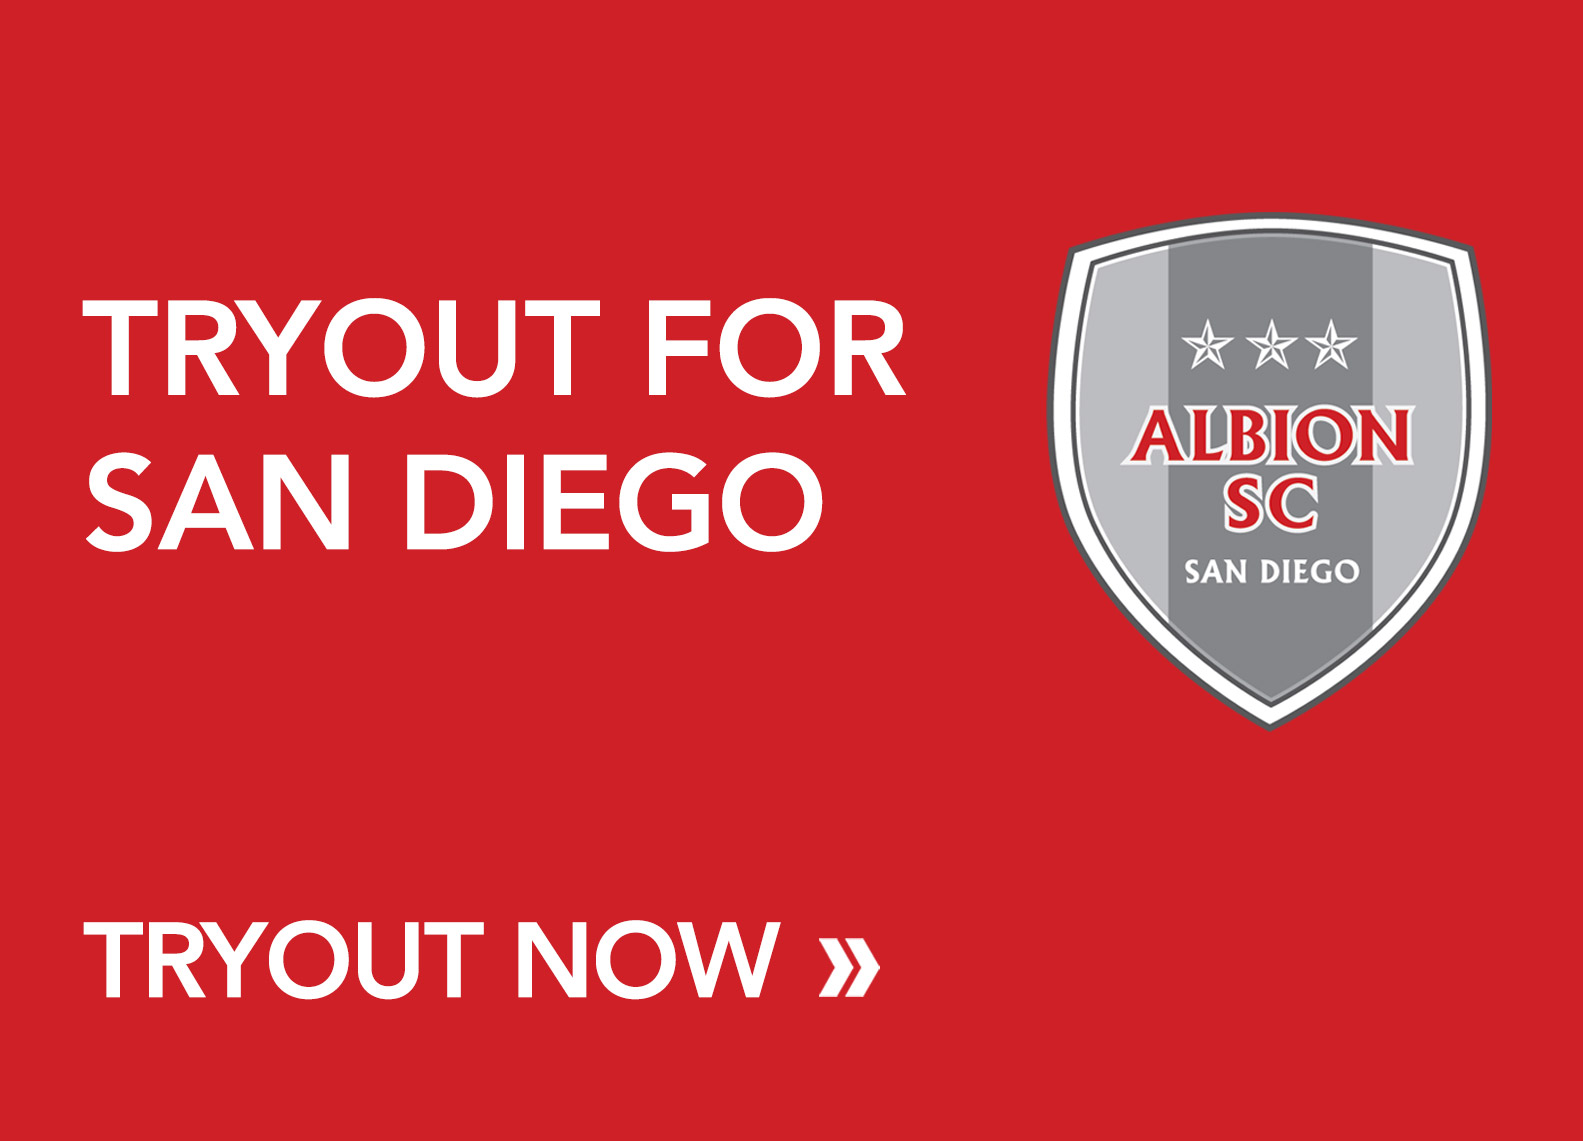 Tryout ALBION San Diego